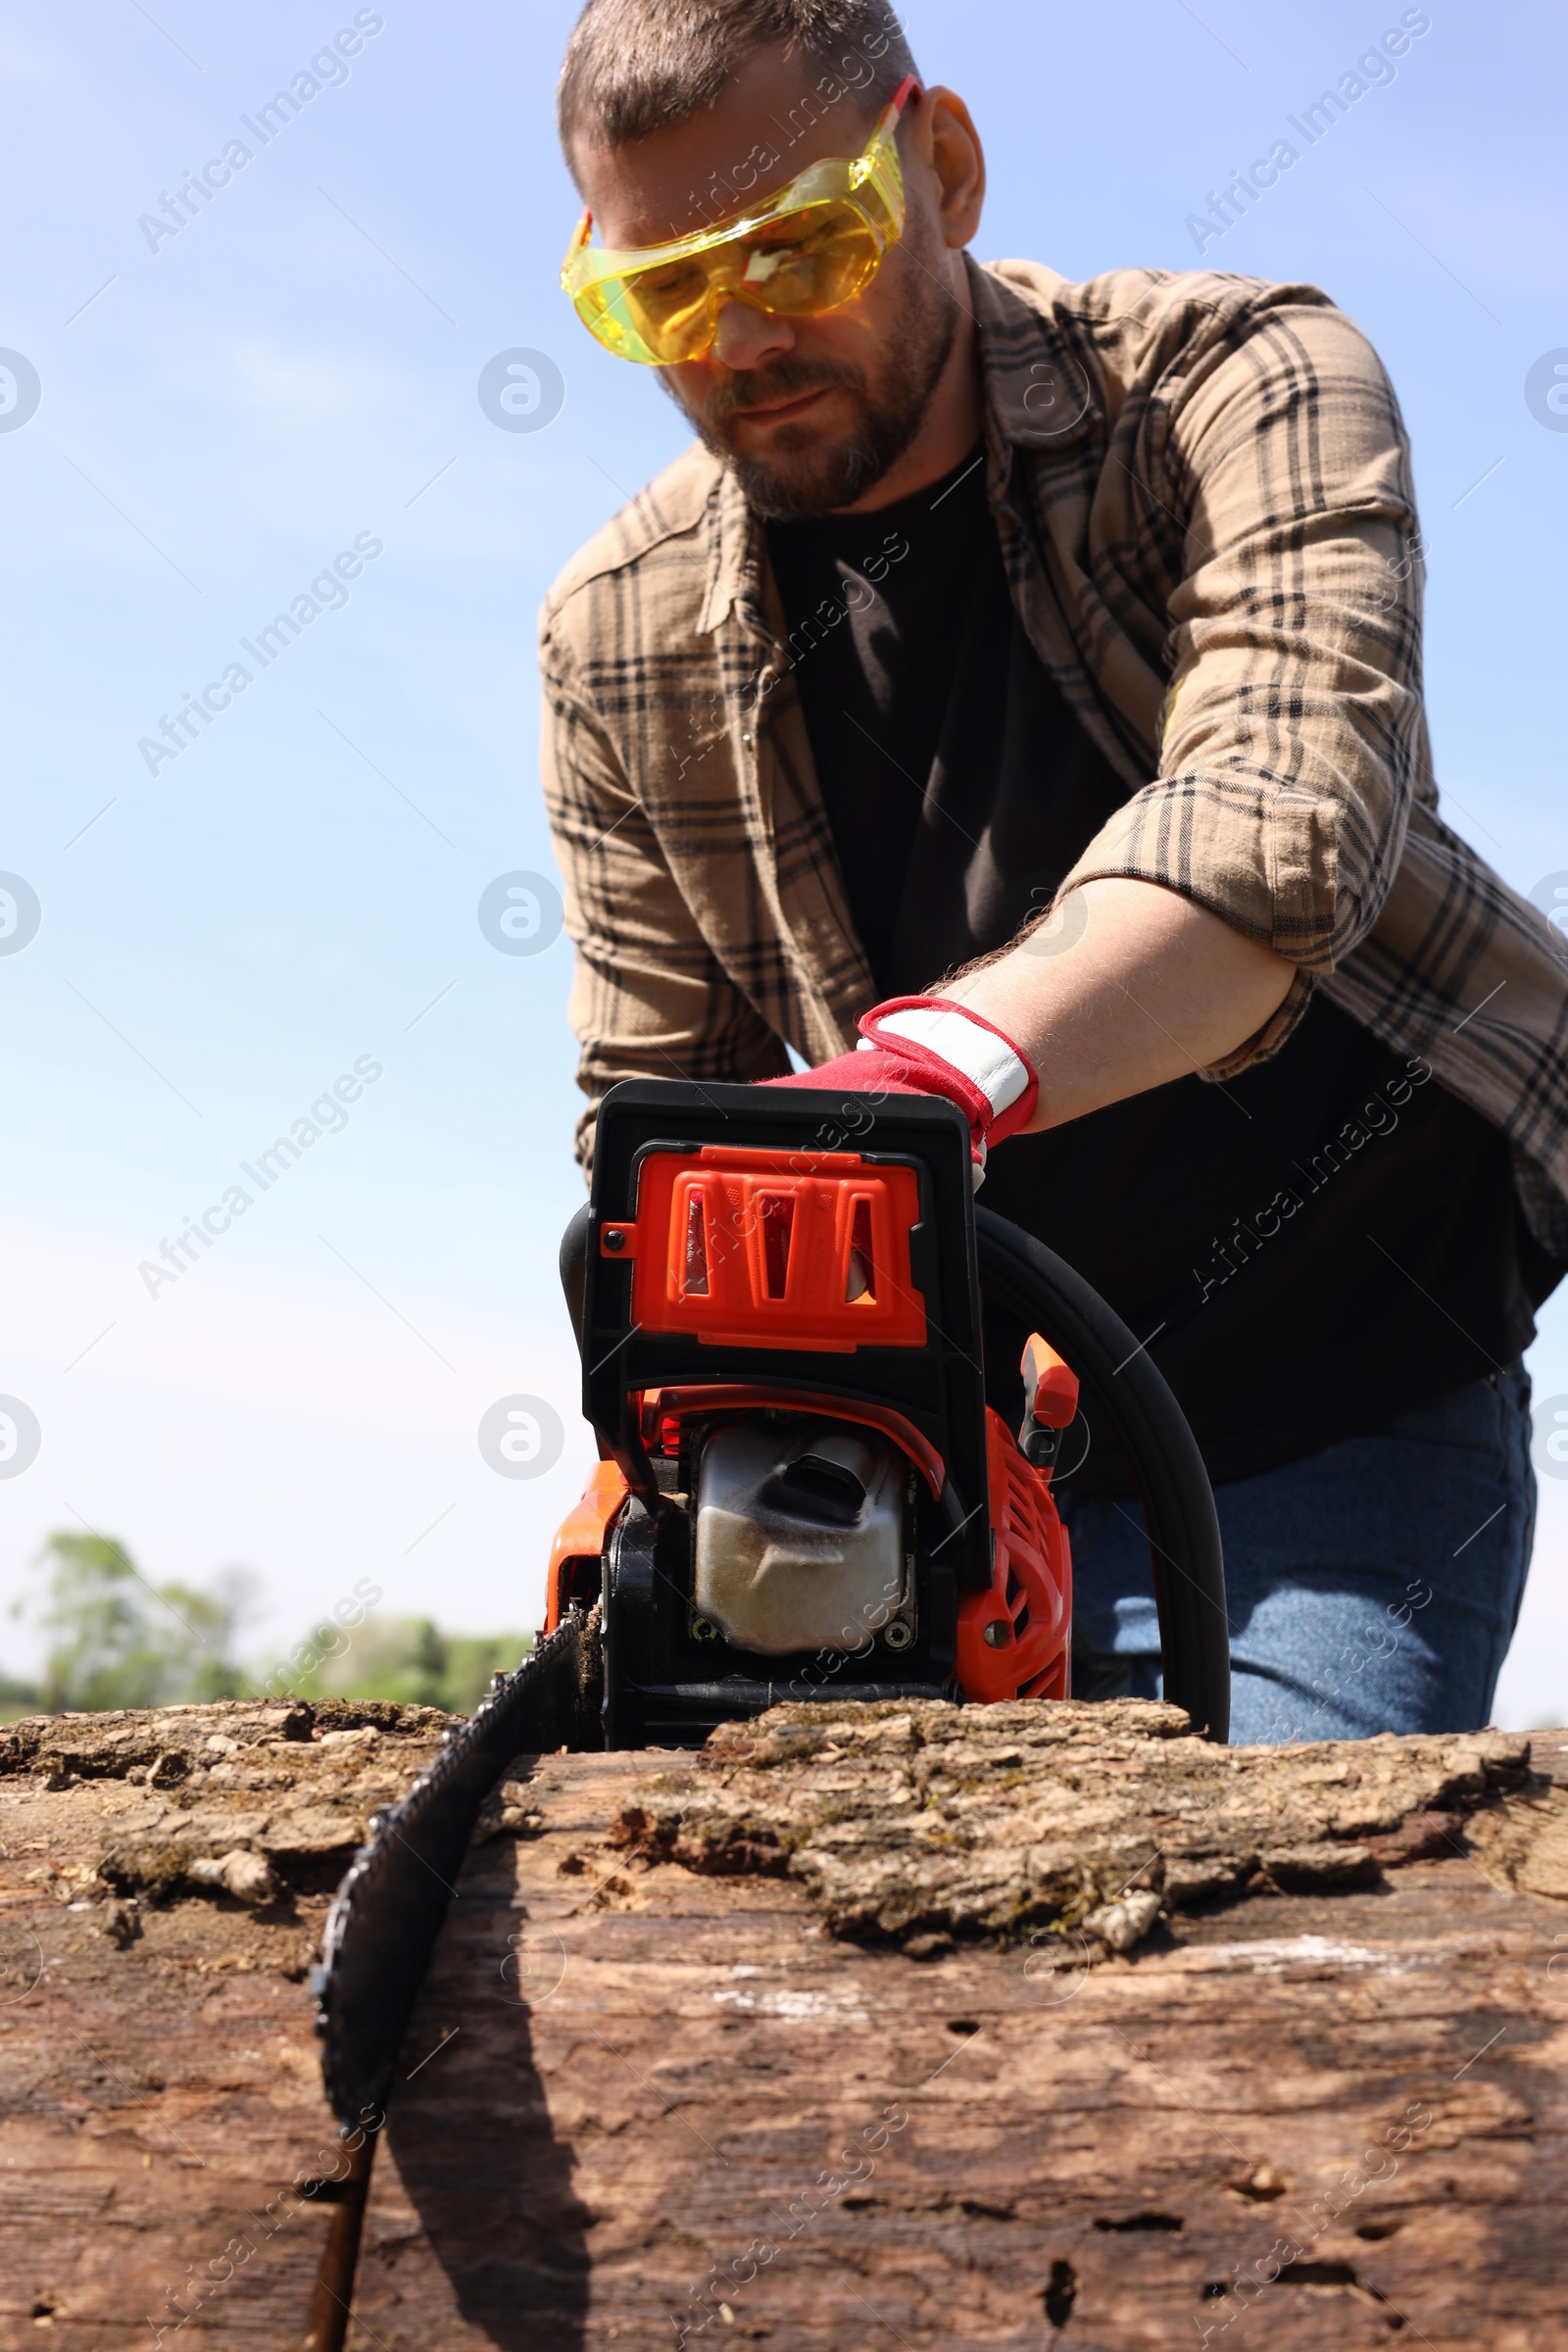 Photo of Man sawing wooden log on sunny day, low angle view